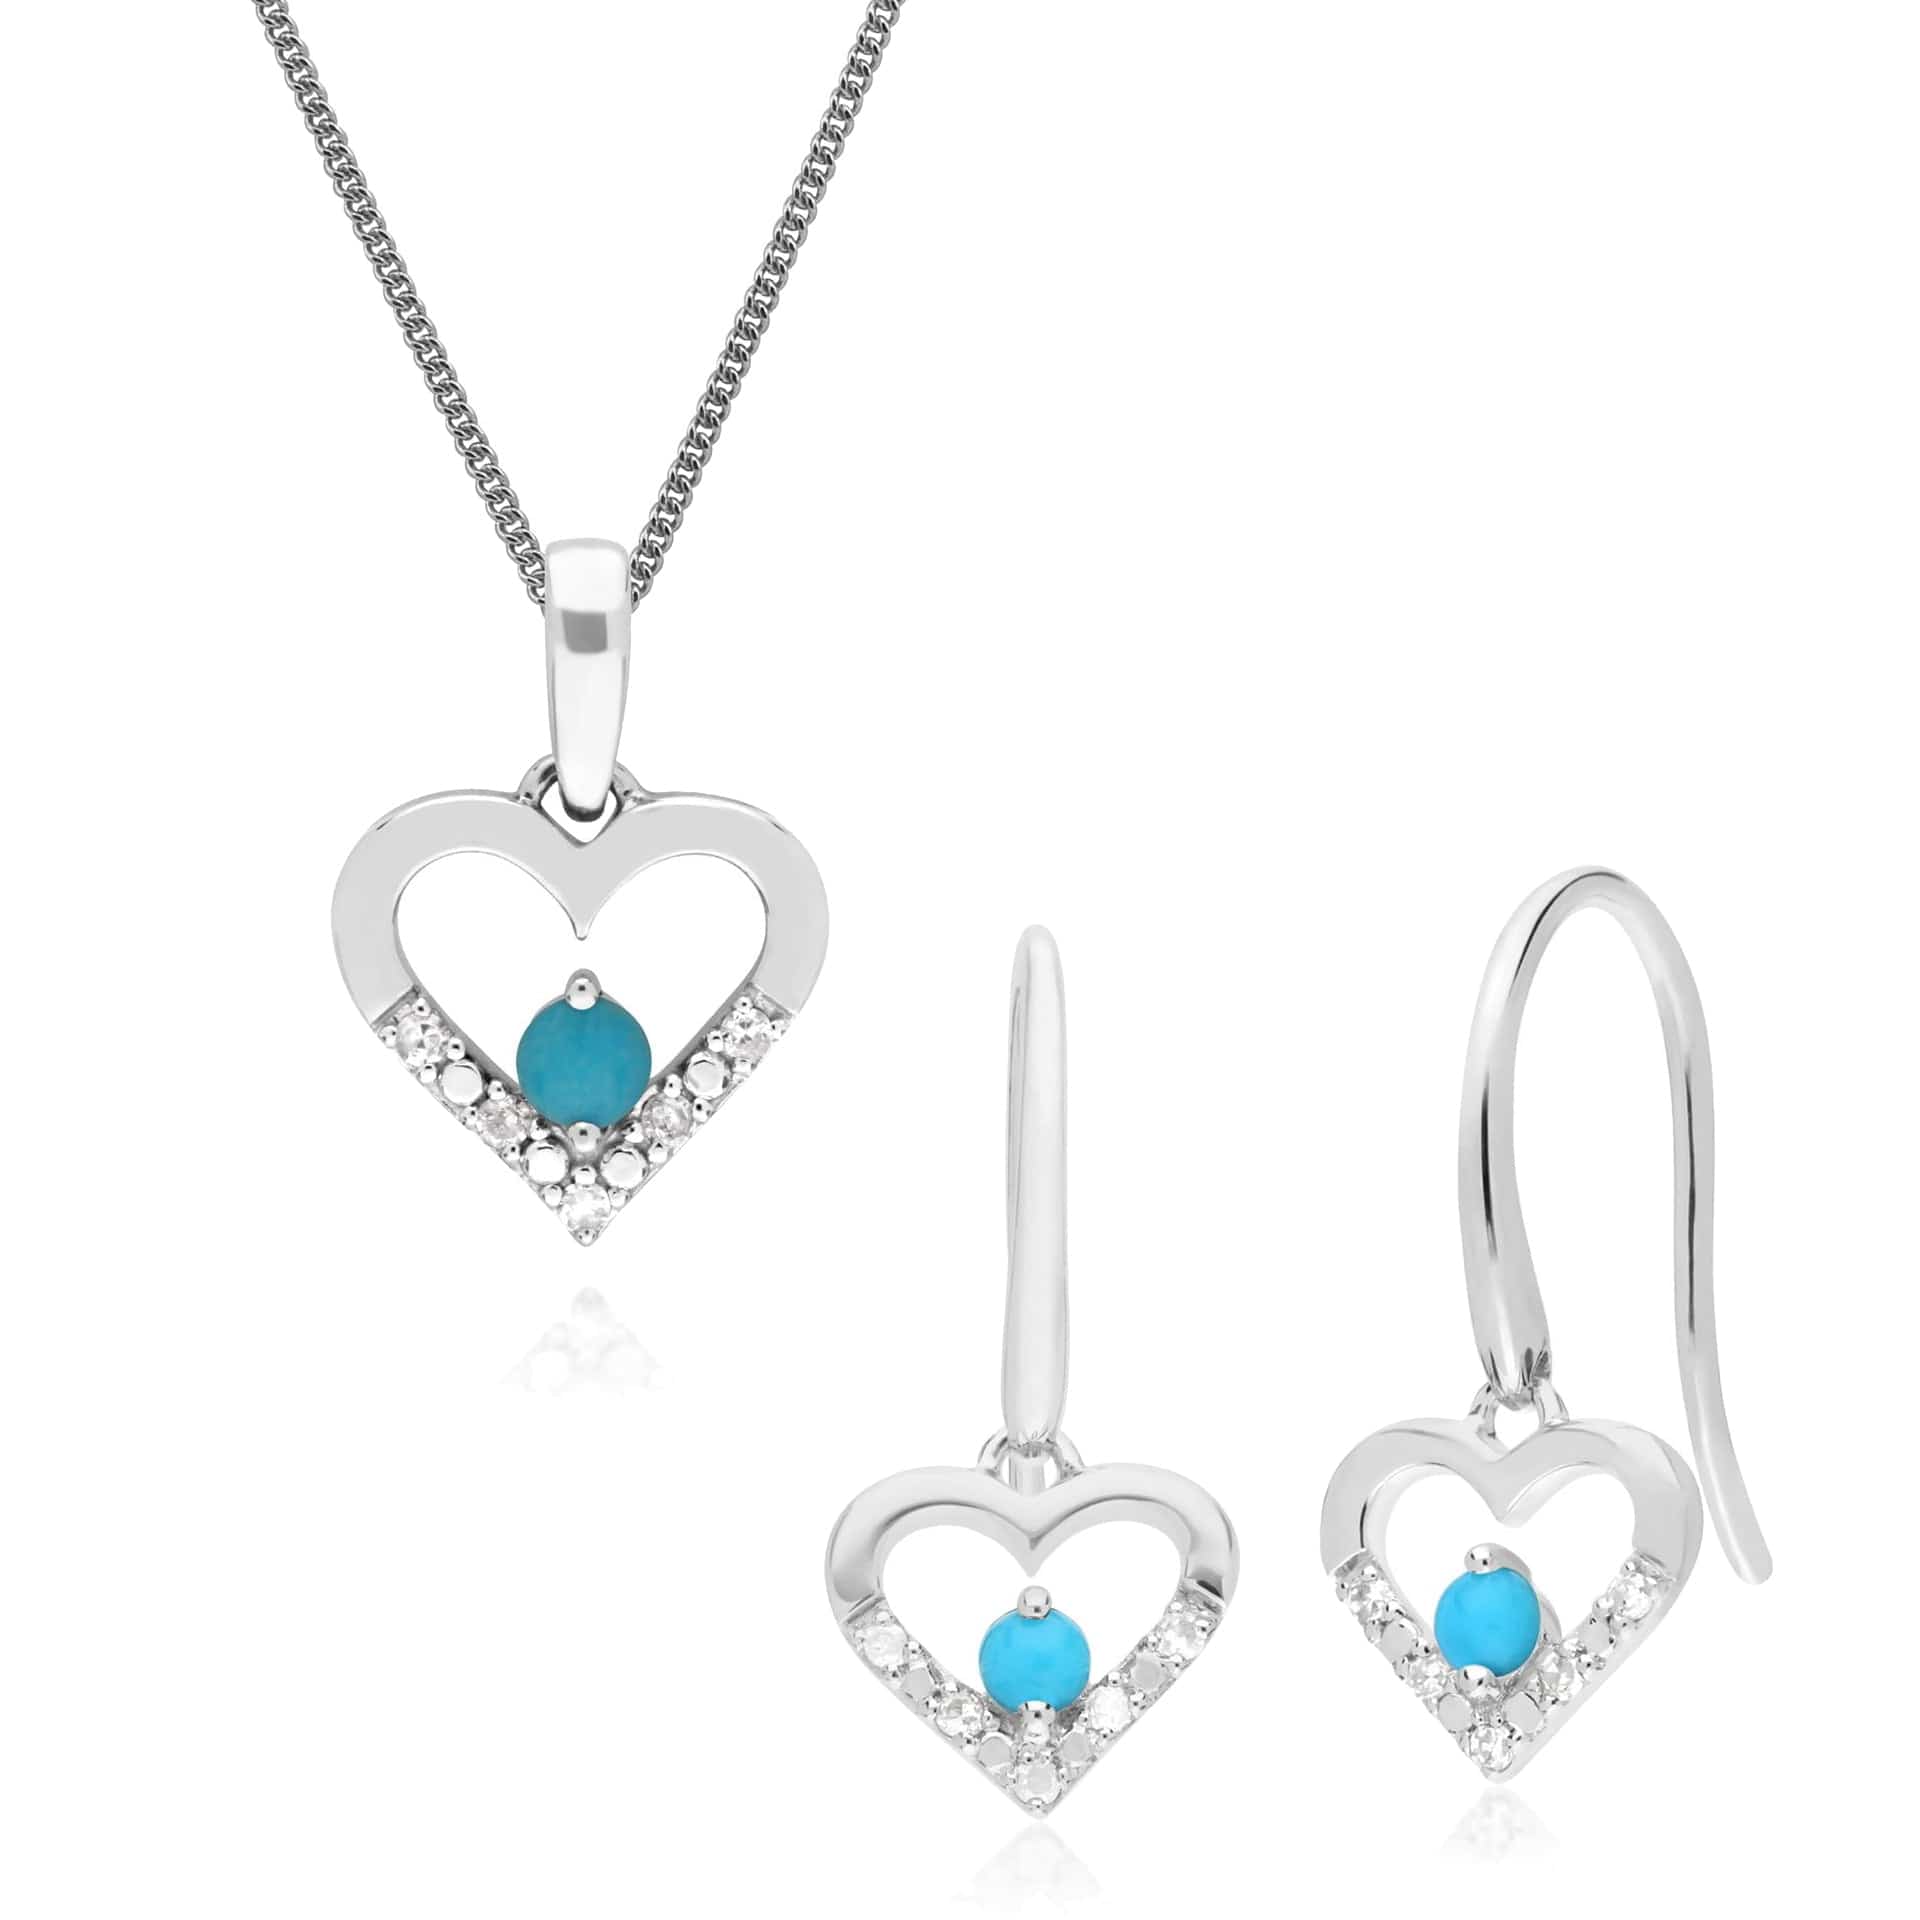 162E0260019-162P0221019 Classic Round Turquoise & Diamond Heart Drop Earrings & Pendant Set in 9ct White Gold 1